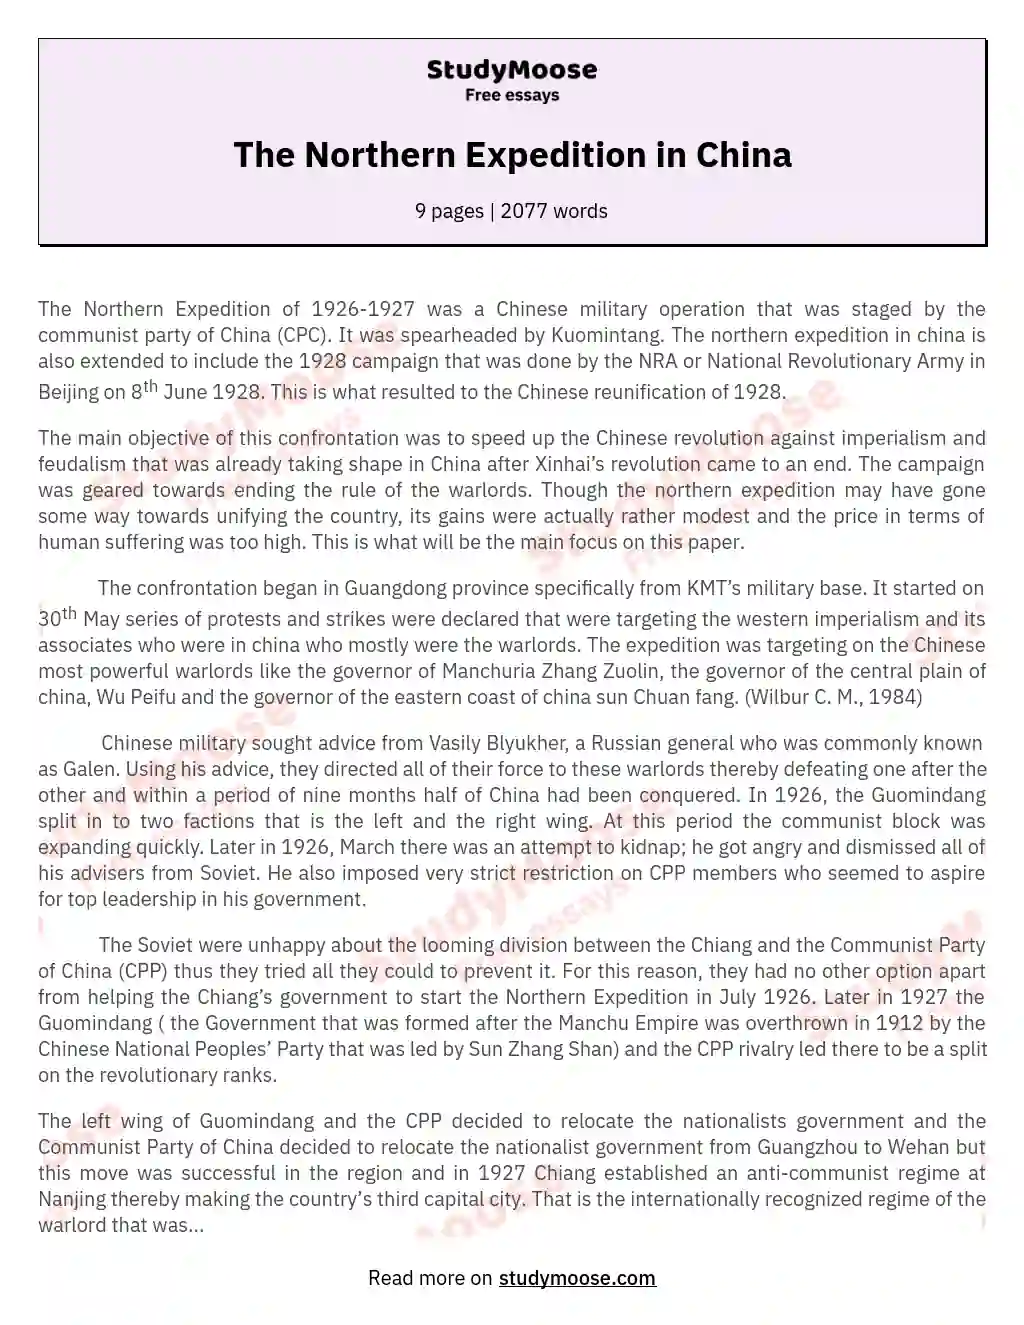 The Northern Expedition in China essay